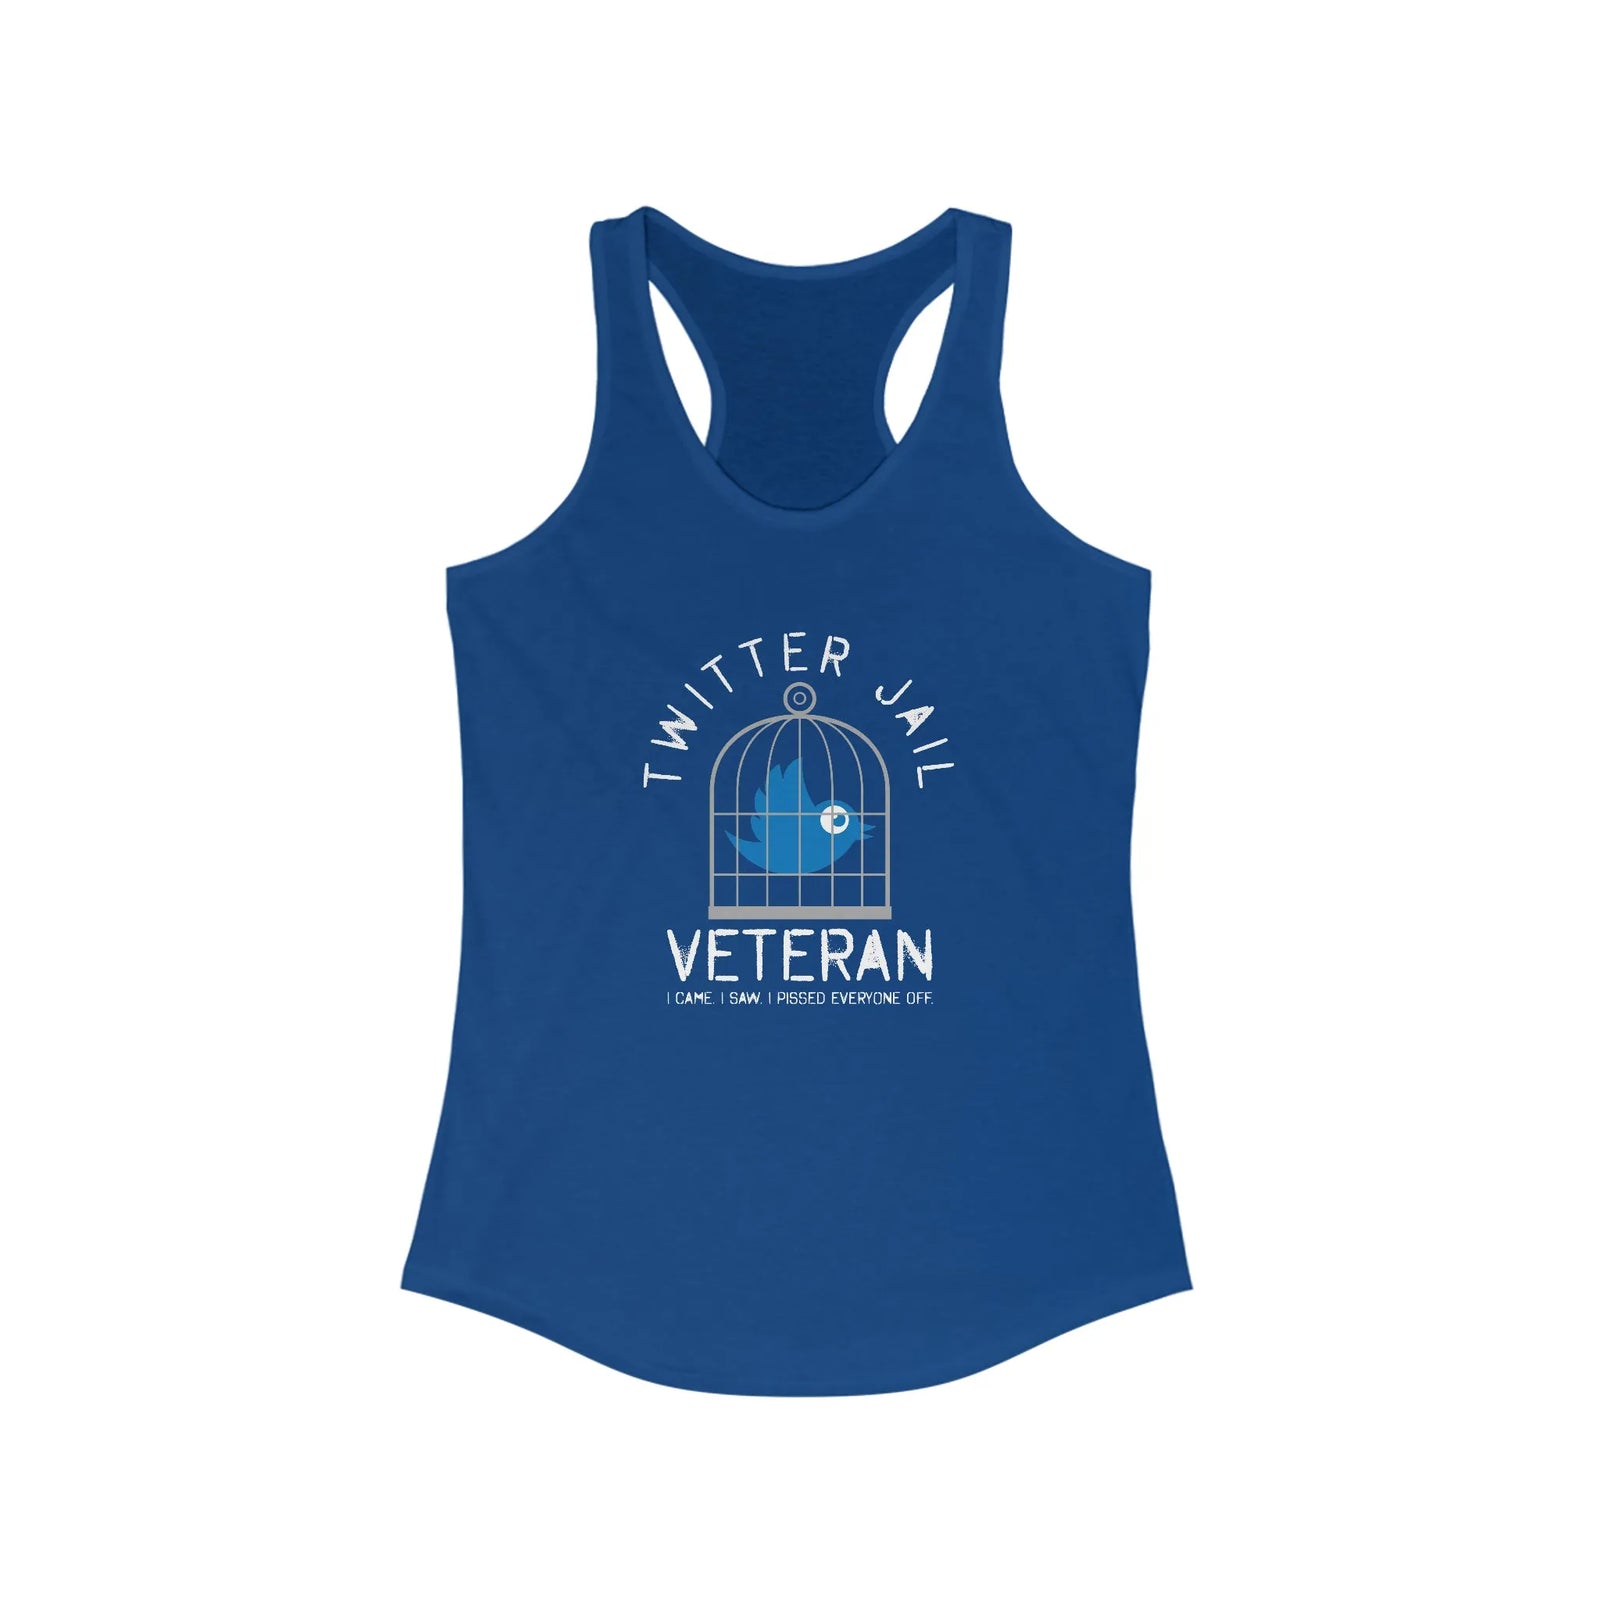 Escaped the Twitter Cage: Veteran Edition Racerback Tank